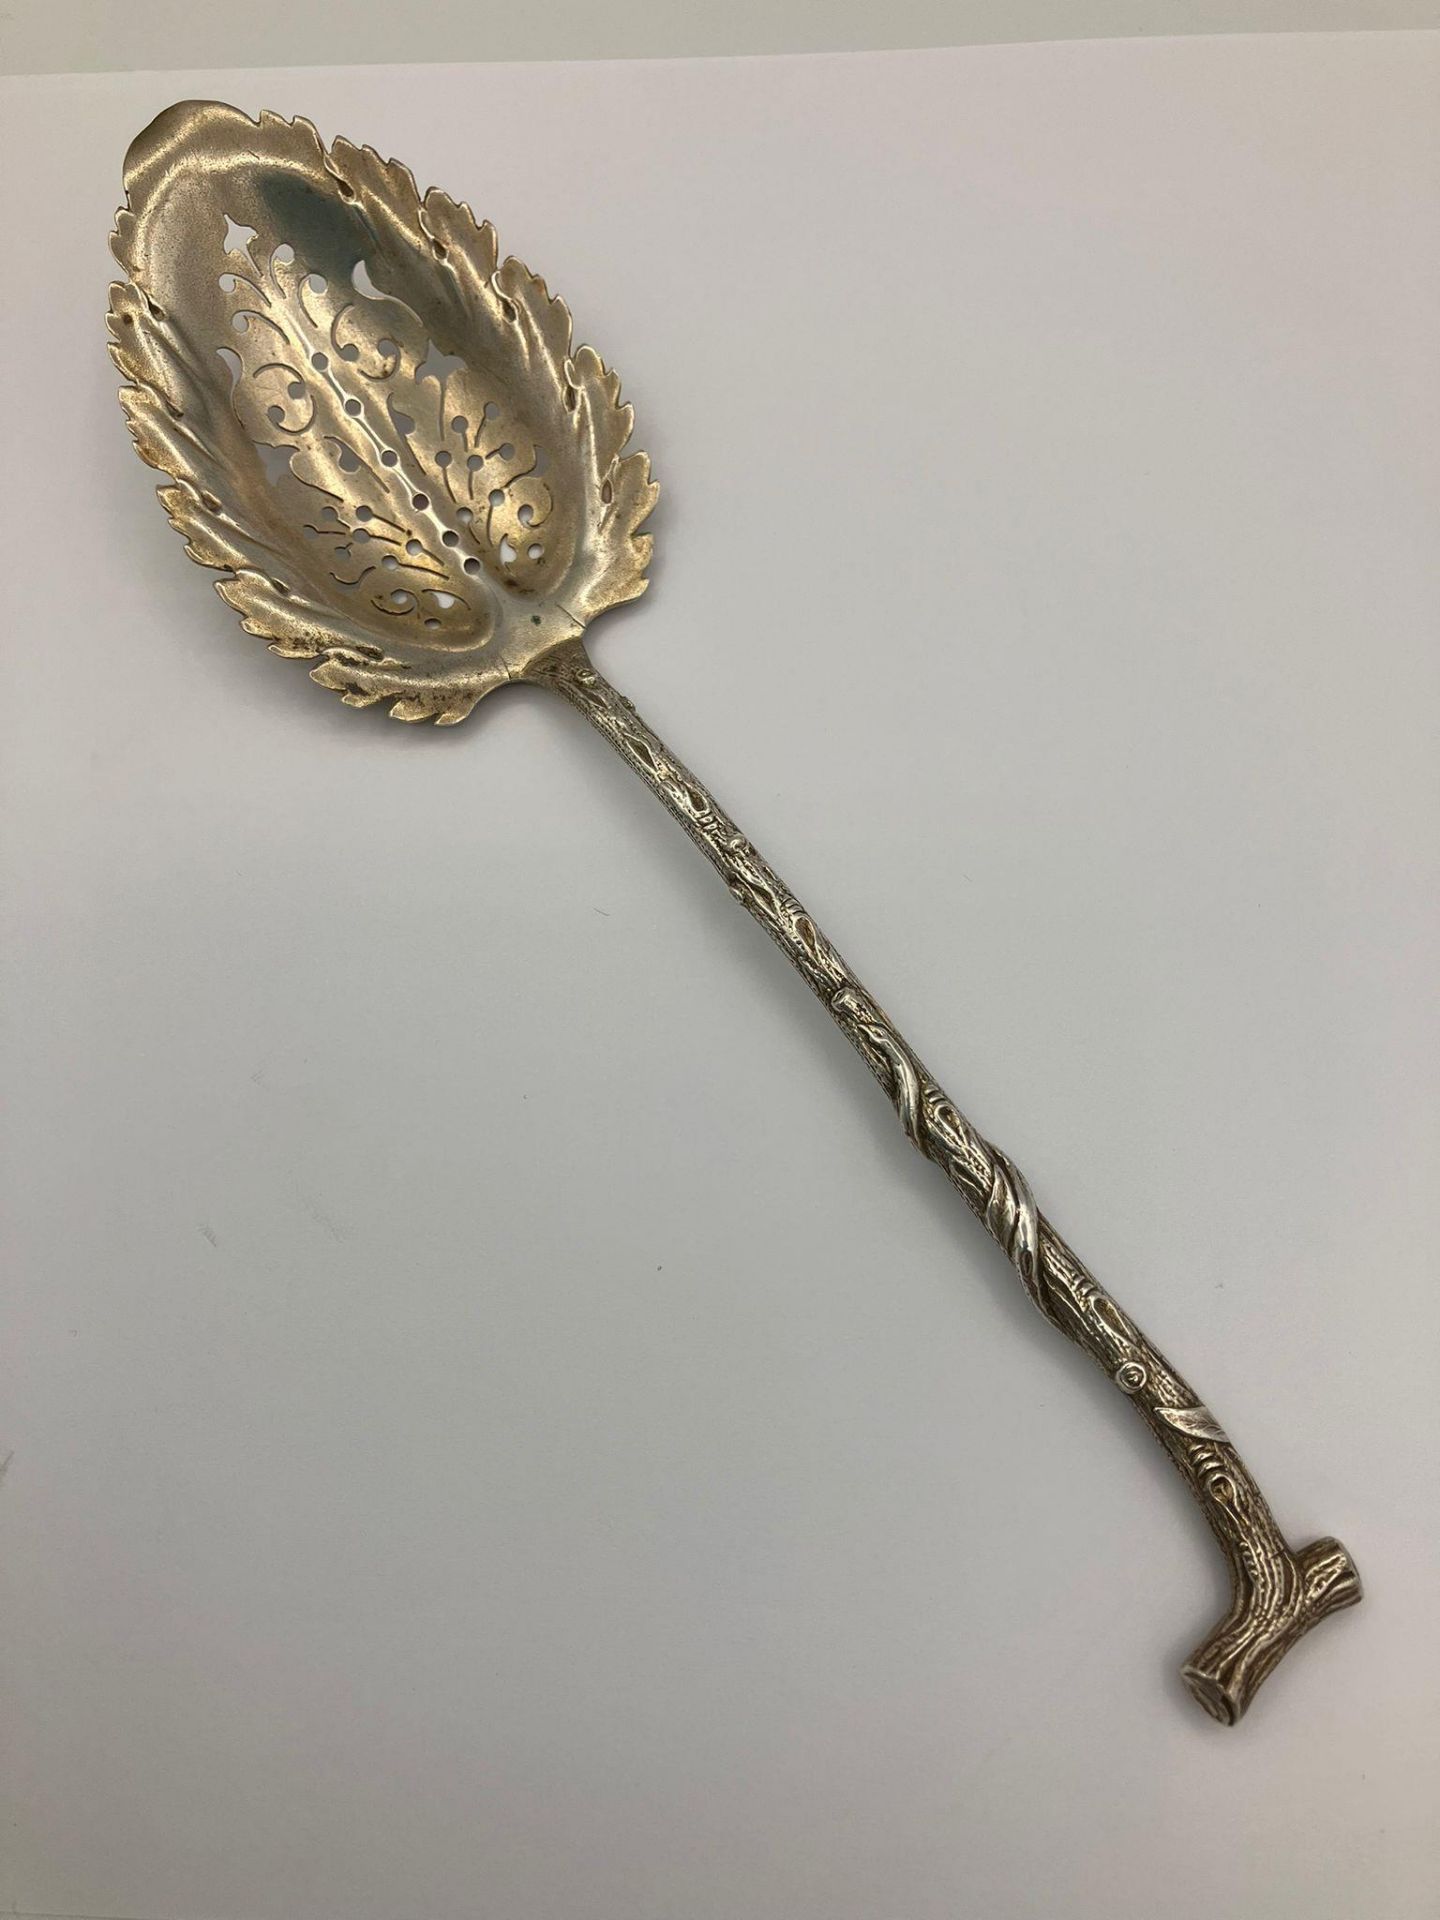 Rare Antique SILVER SIFTING SPOON in the shape of a branch.Having a leaf design bowl with a twig